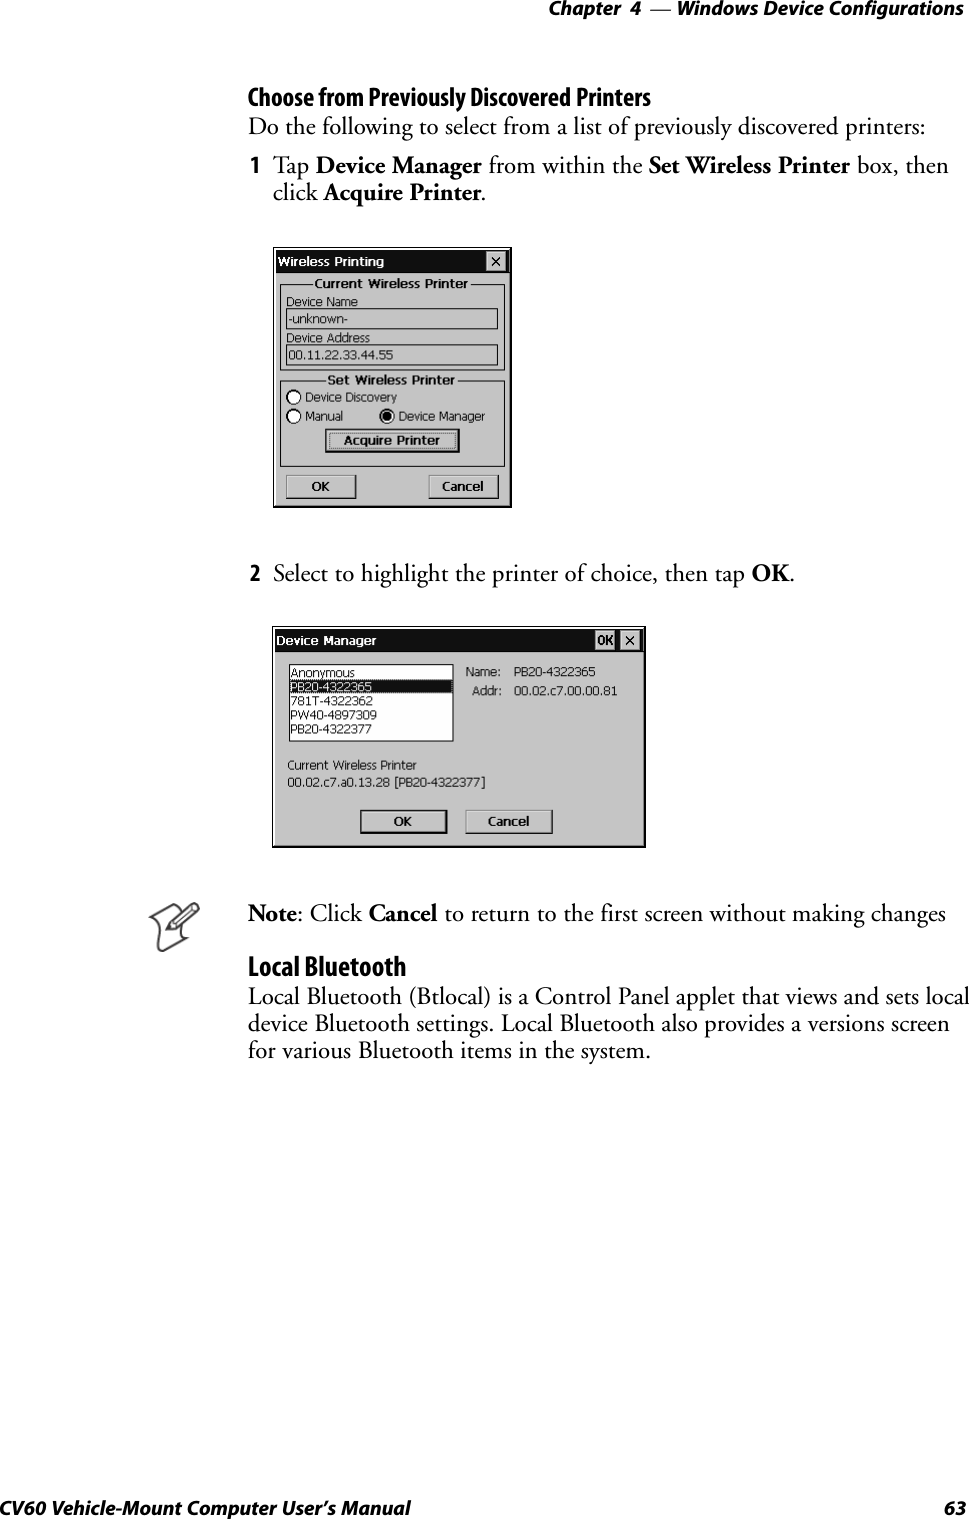 Windows Device Configurations—Chapter  463CV60 Vehicle-Mount Computer User&apos;s ManualChoose from Previously Discovered PrintersDo the following to select from a list of previously discovered printers:1Tap Device Manager from within the Set Wireless Printer box, thenclick Acquire Printer.2Select to highlight the printer of choice, then tap OK.Note: Click Cancel to return to the first screen without making changesLocal BluetoothLocal Bluetooth (Btlocal) is a Control Panel applet that views and sets localdevice Bluetooth settings. Local Bluetooth also provides a versions screenfor various Bluetooth items in the system.